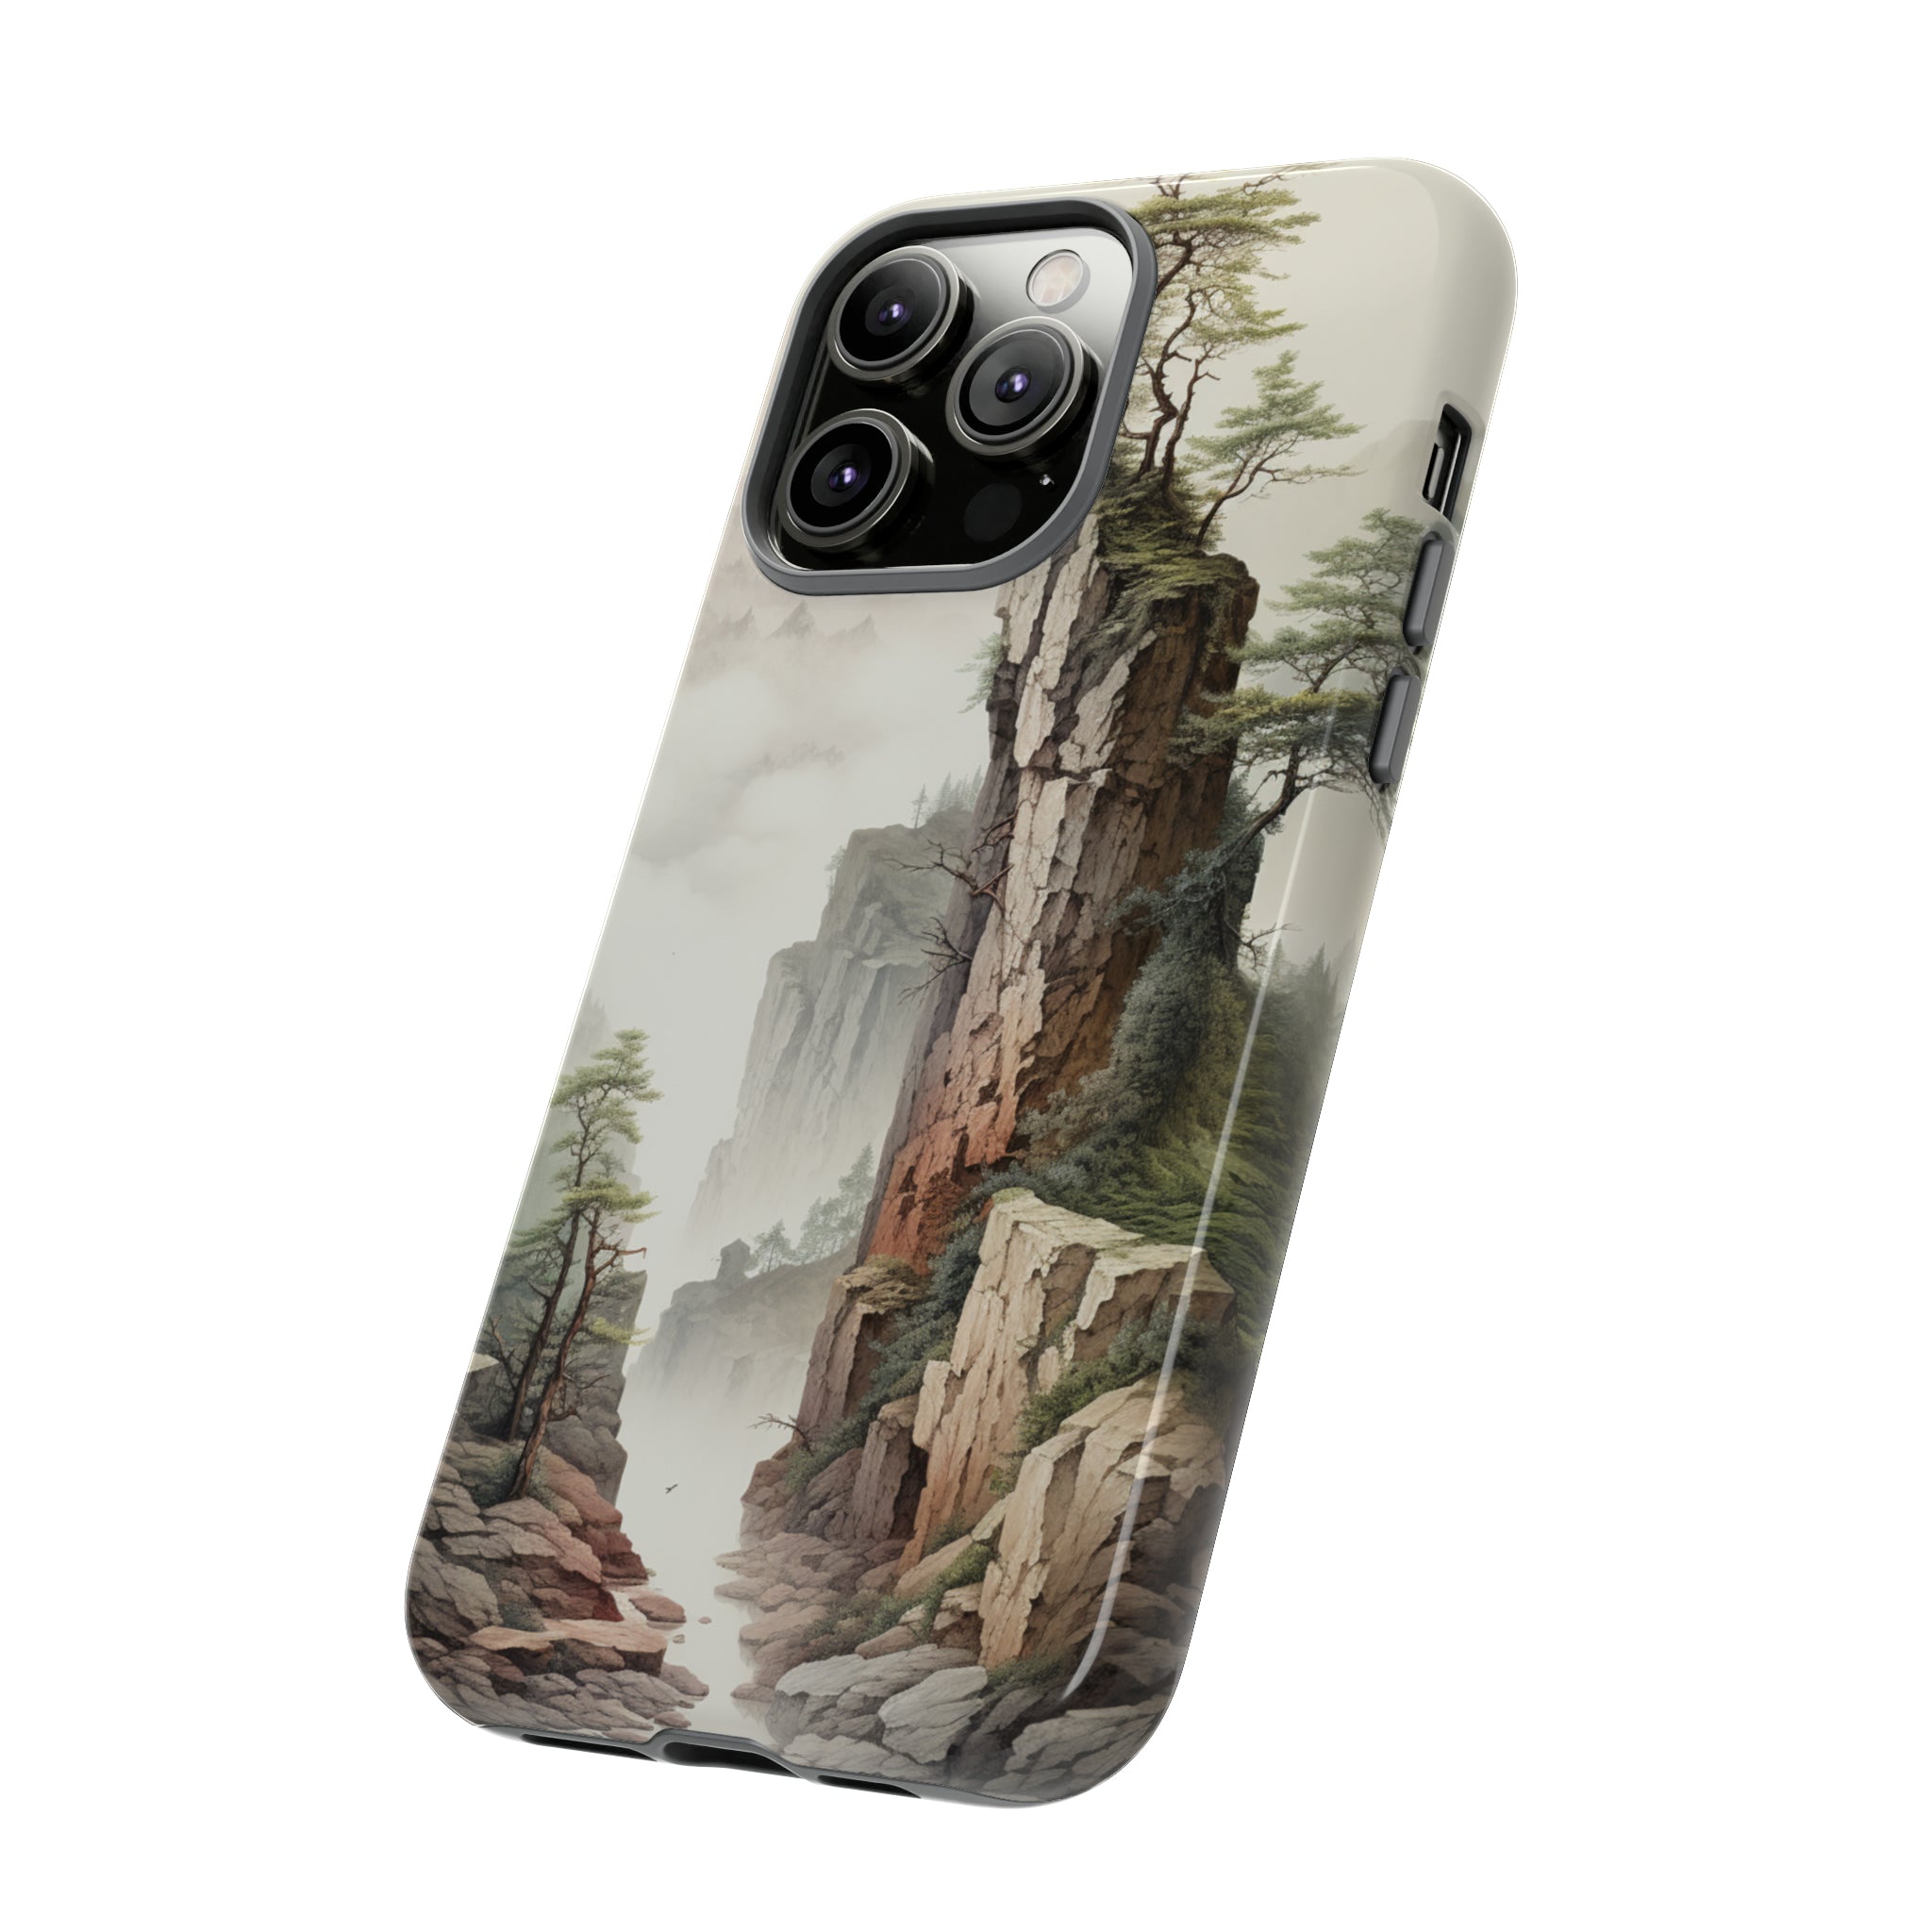 NiceView - Phone Cases